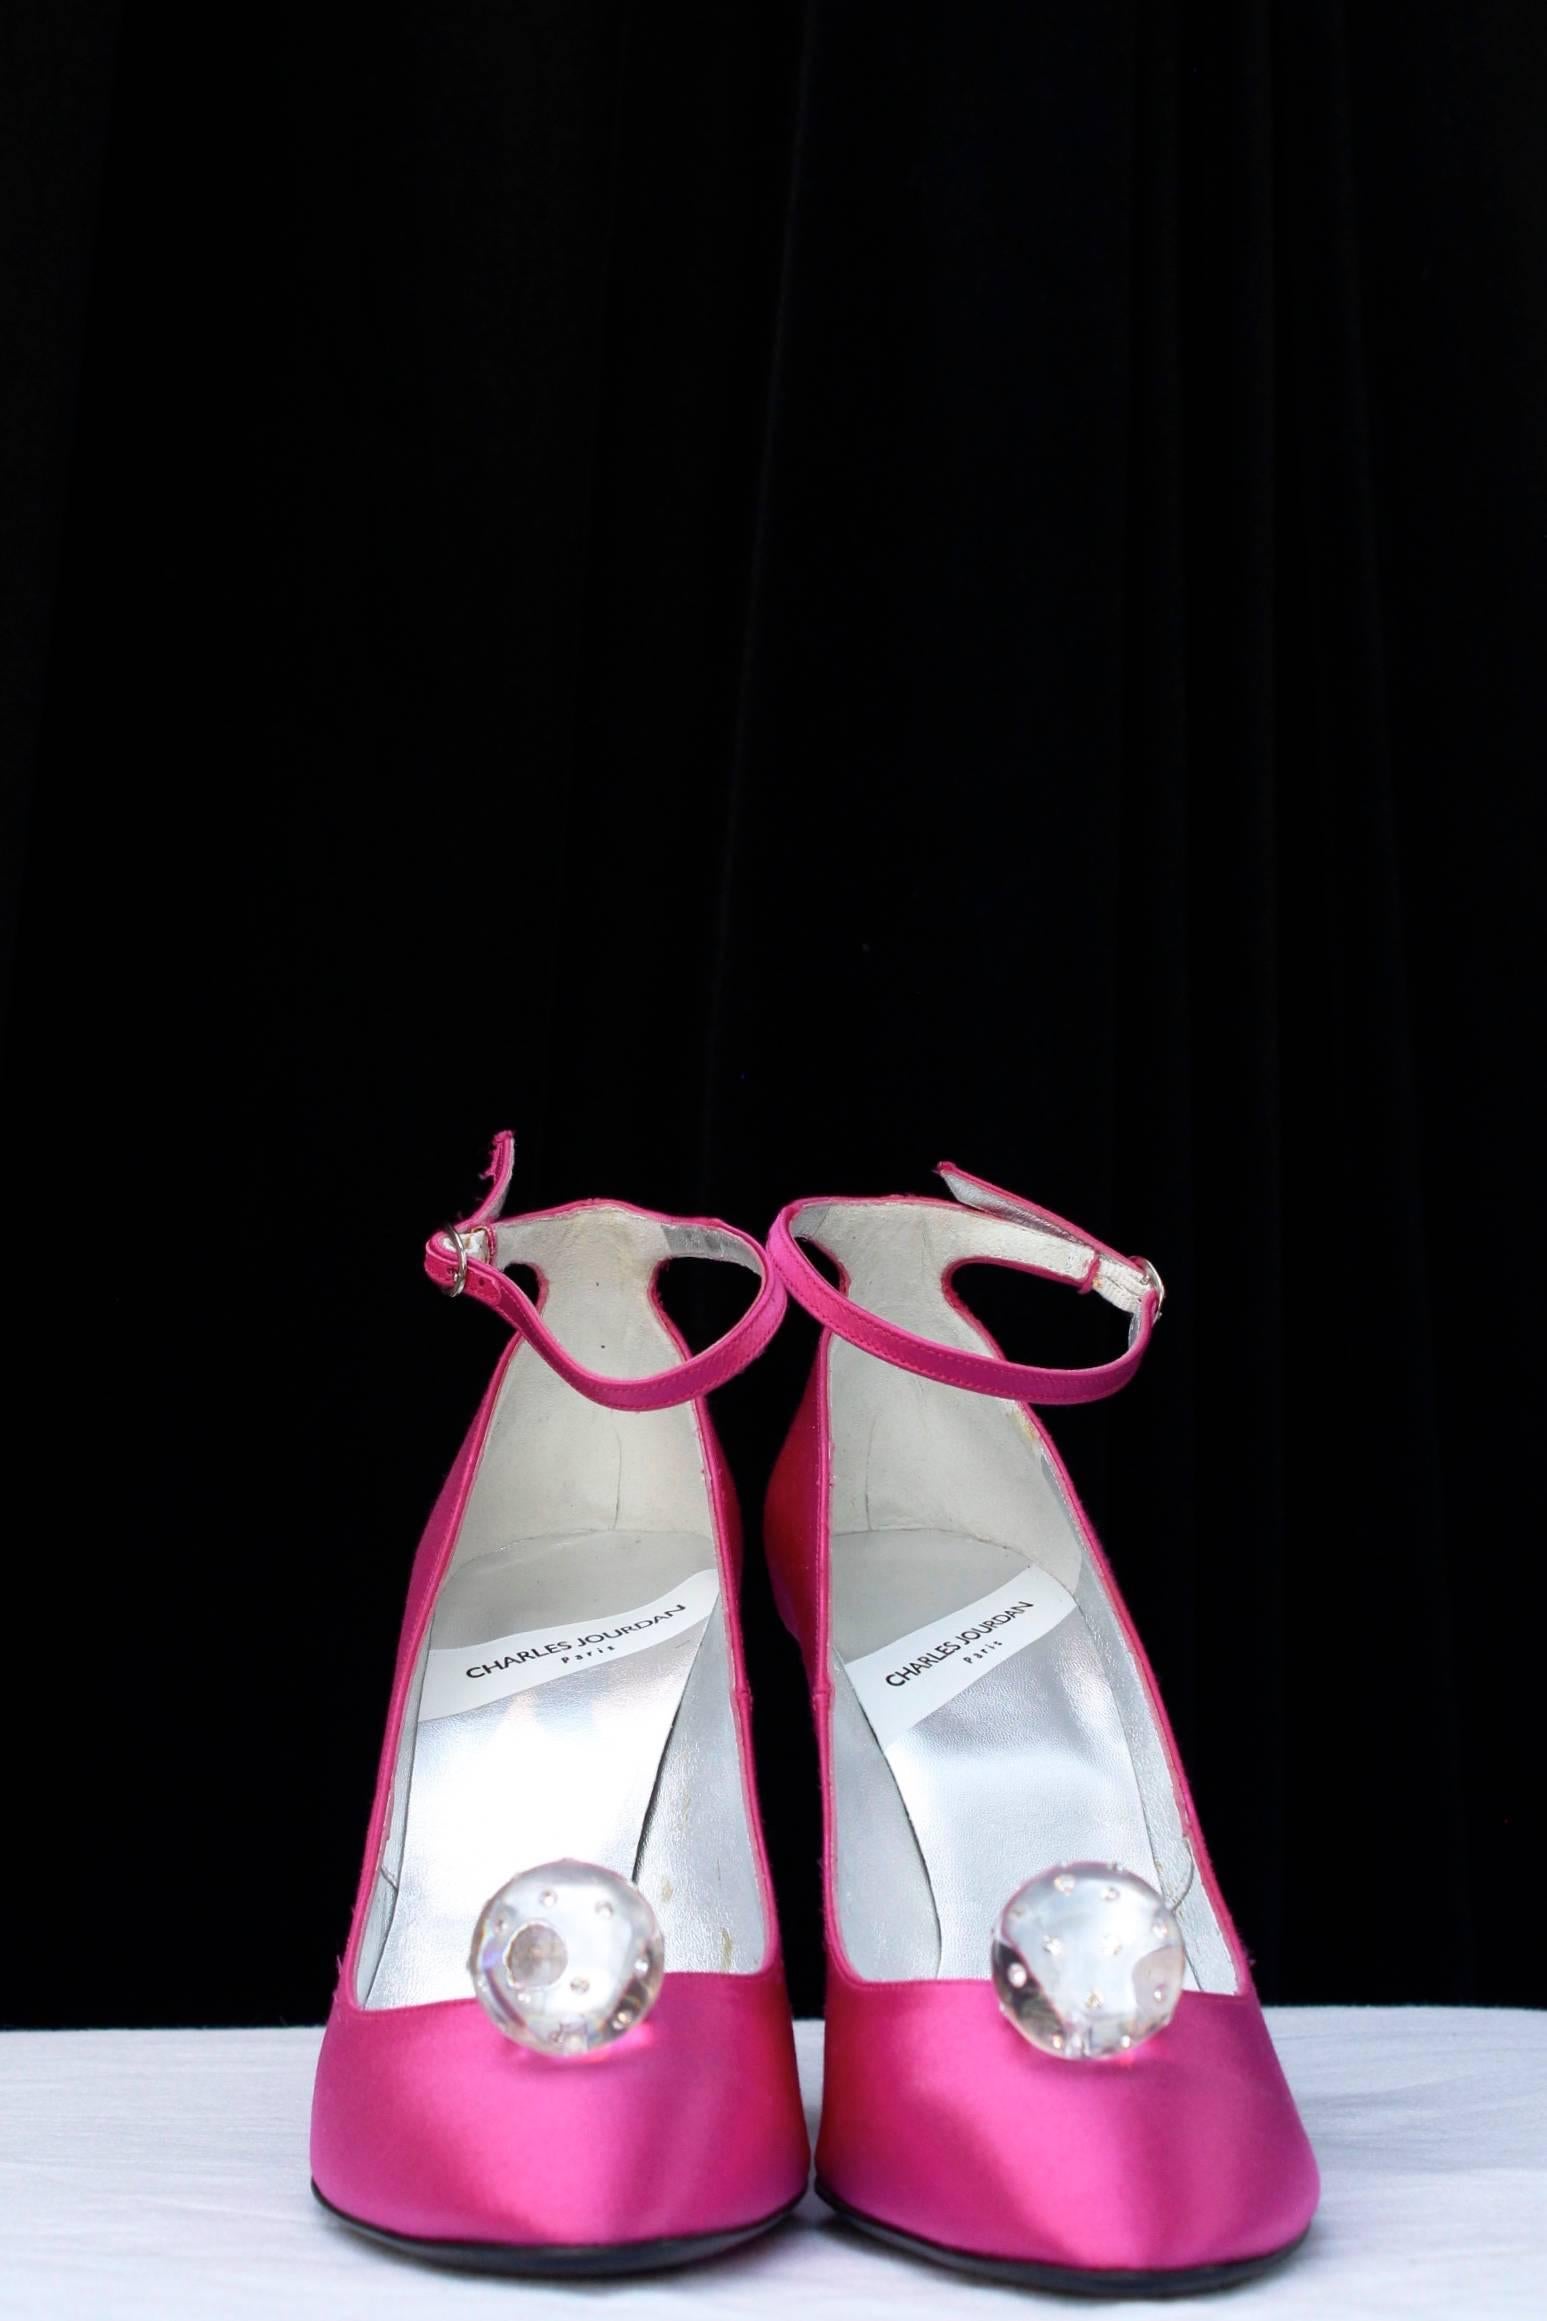 CHARLES JOURDAN (Made in France) Sling back pumps composed of fuchsia satin, decorated at front with a transparent sphere inlaid with rhinestones. Identical spheres decorate the heels. Silver color leather inner sole, black leather outer sole.

They